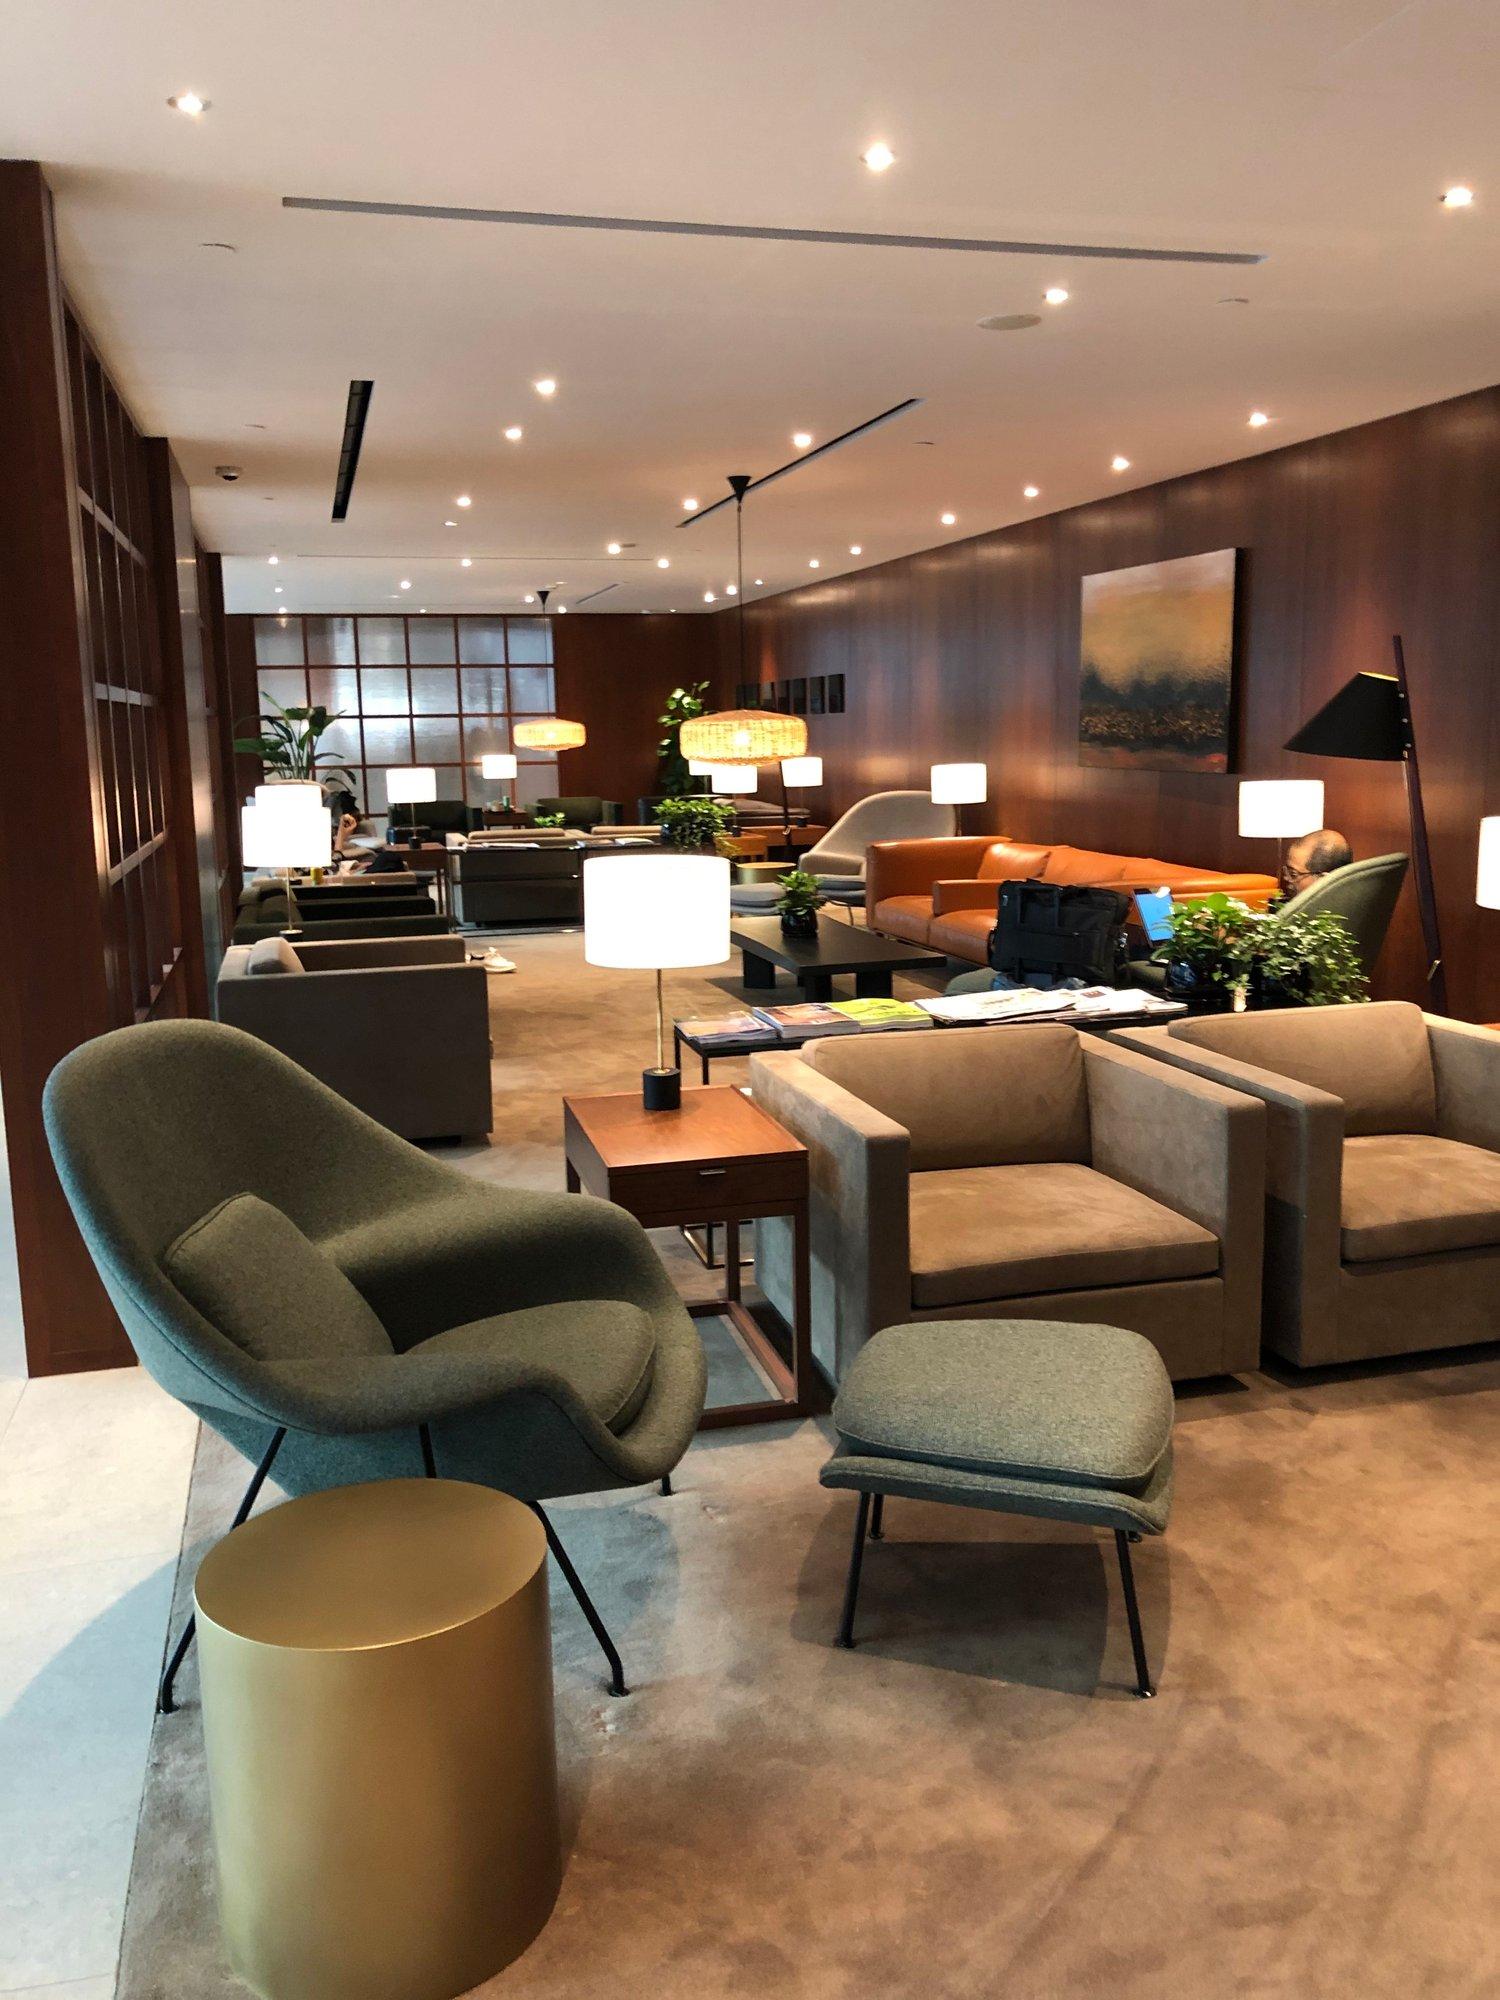 No. 68 Cathay Pacific Business Class Lounge image 1 of 7